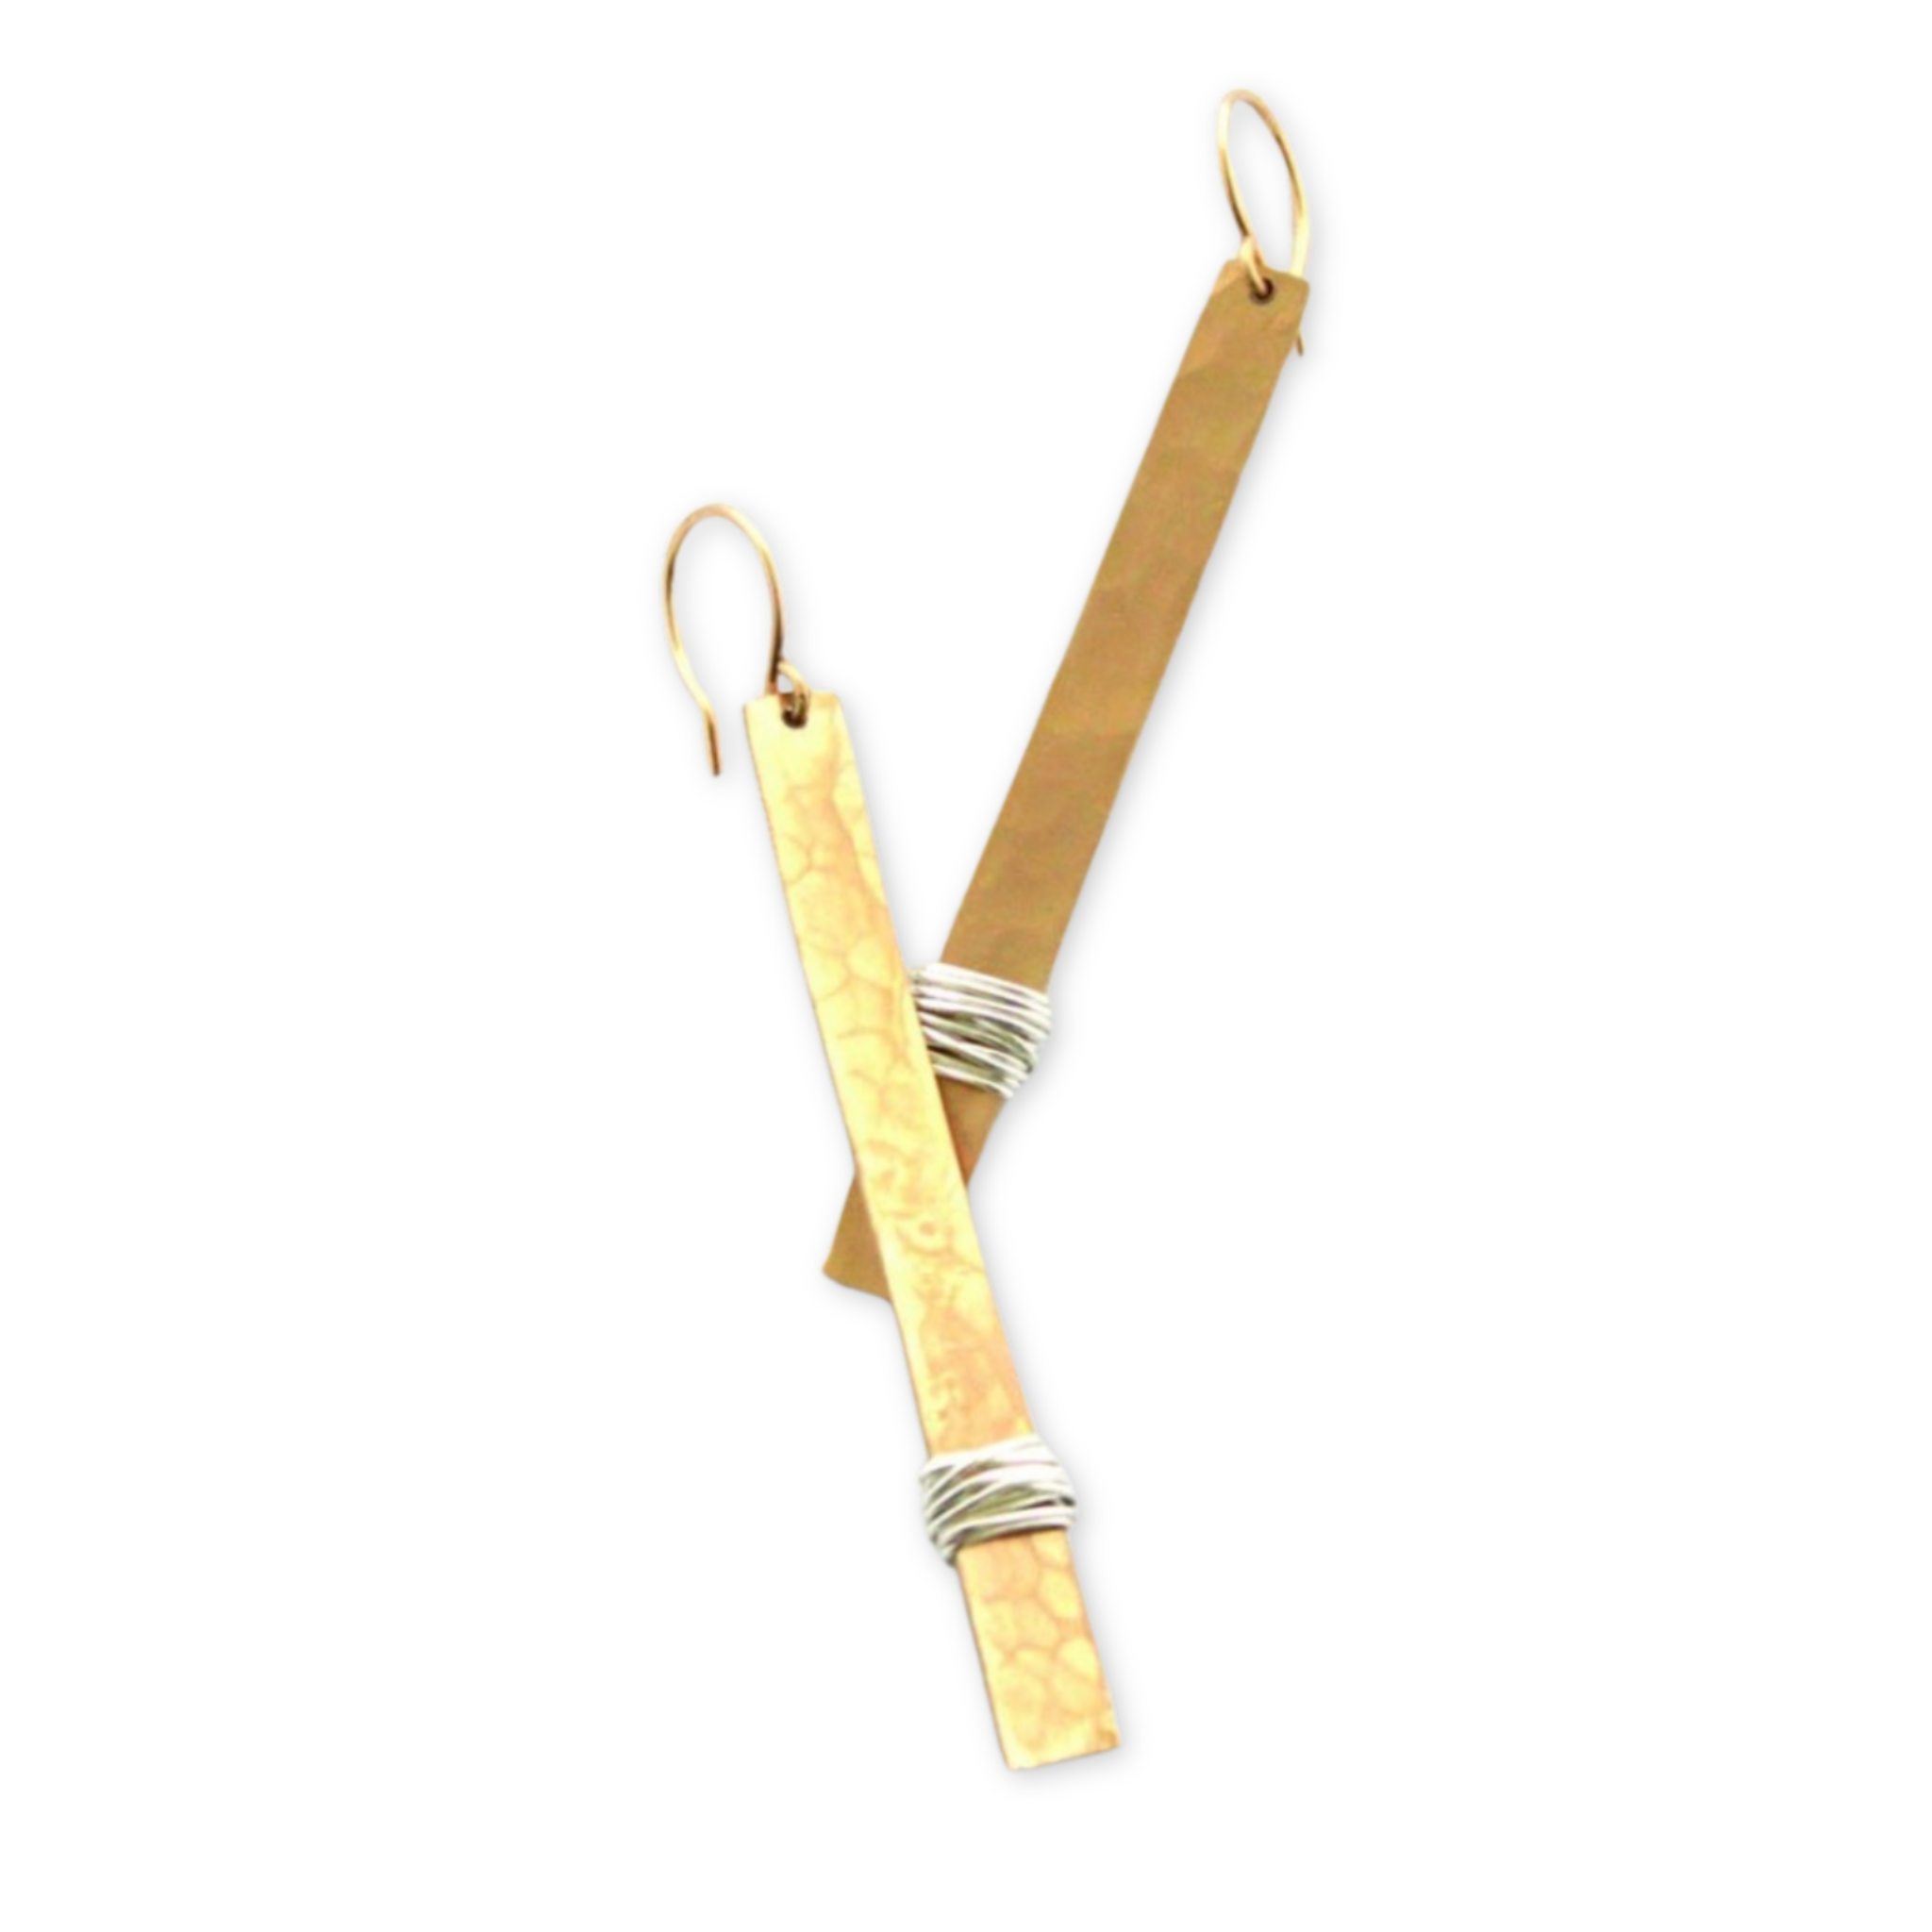 a pair of earrings with long rectangles wrapped in wire